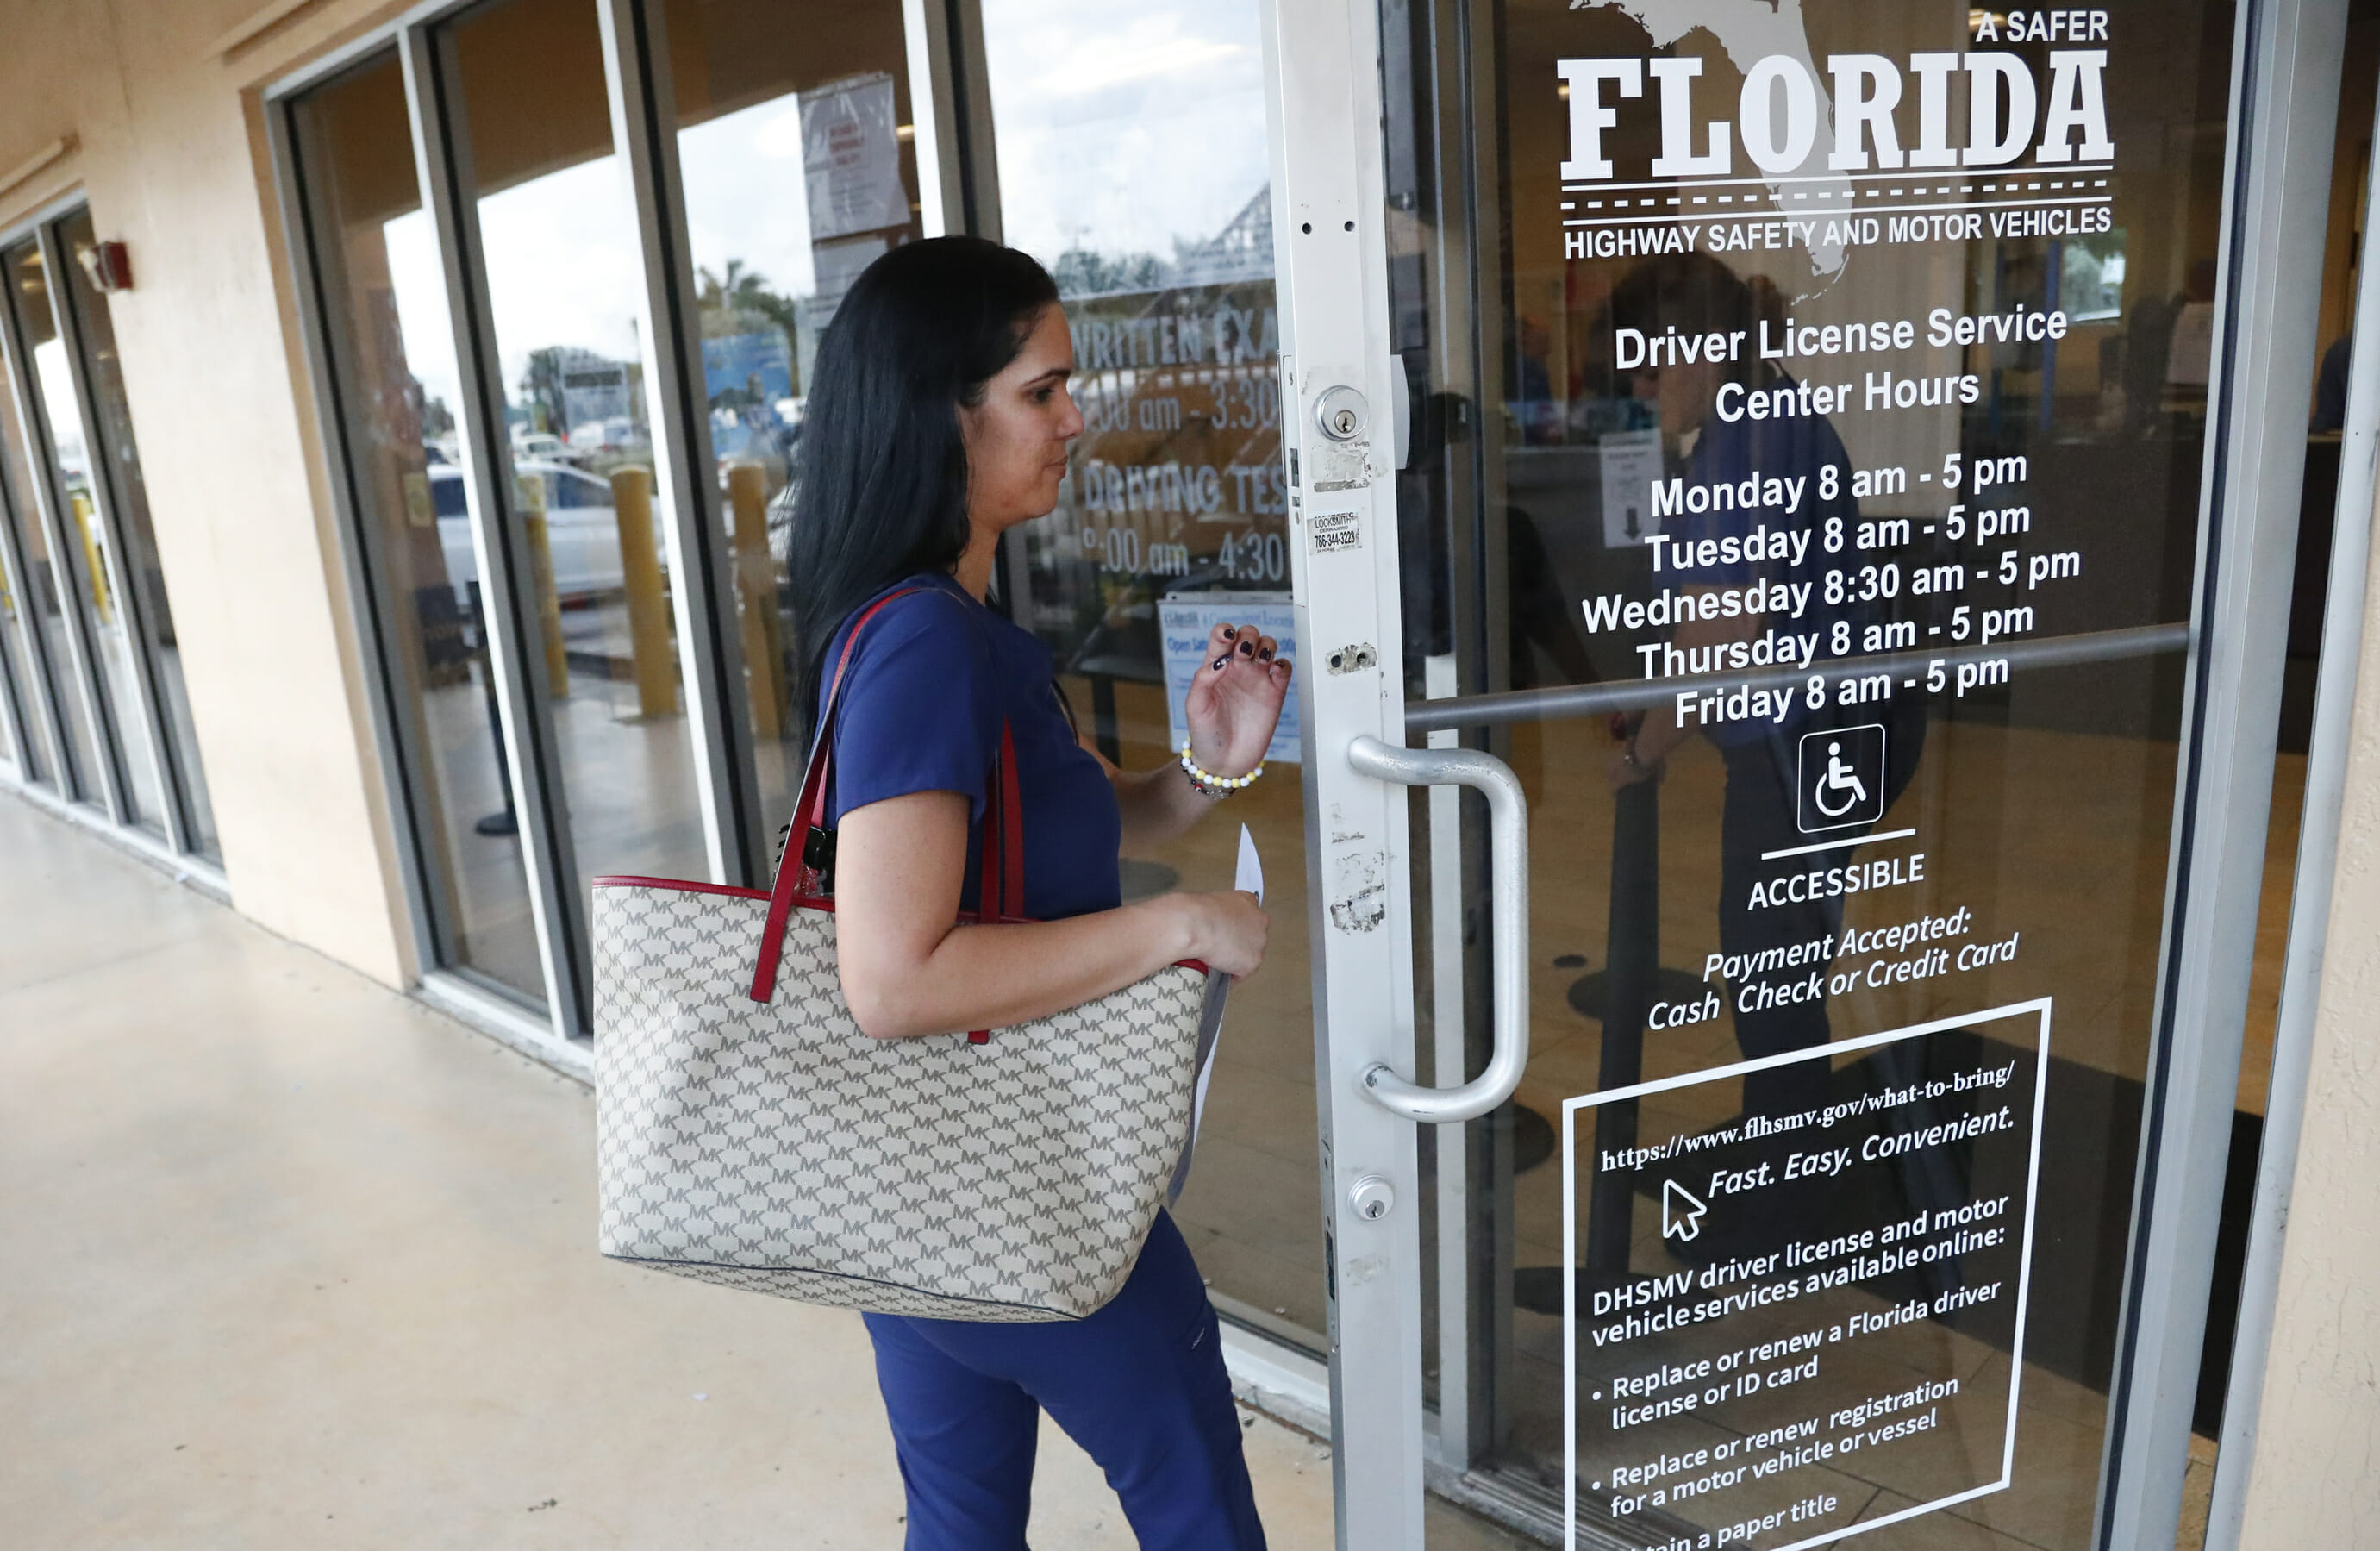 A woman enters a Florida Highway Safety and Motor Vehicles drivers license service center, Tuesday, Oct. 8, 2019, in Hialeah, Fla.